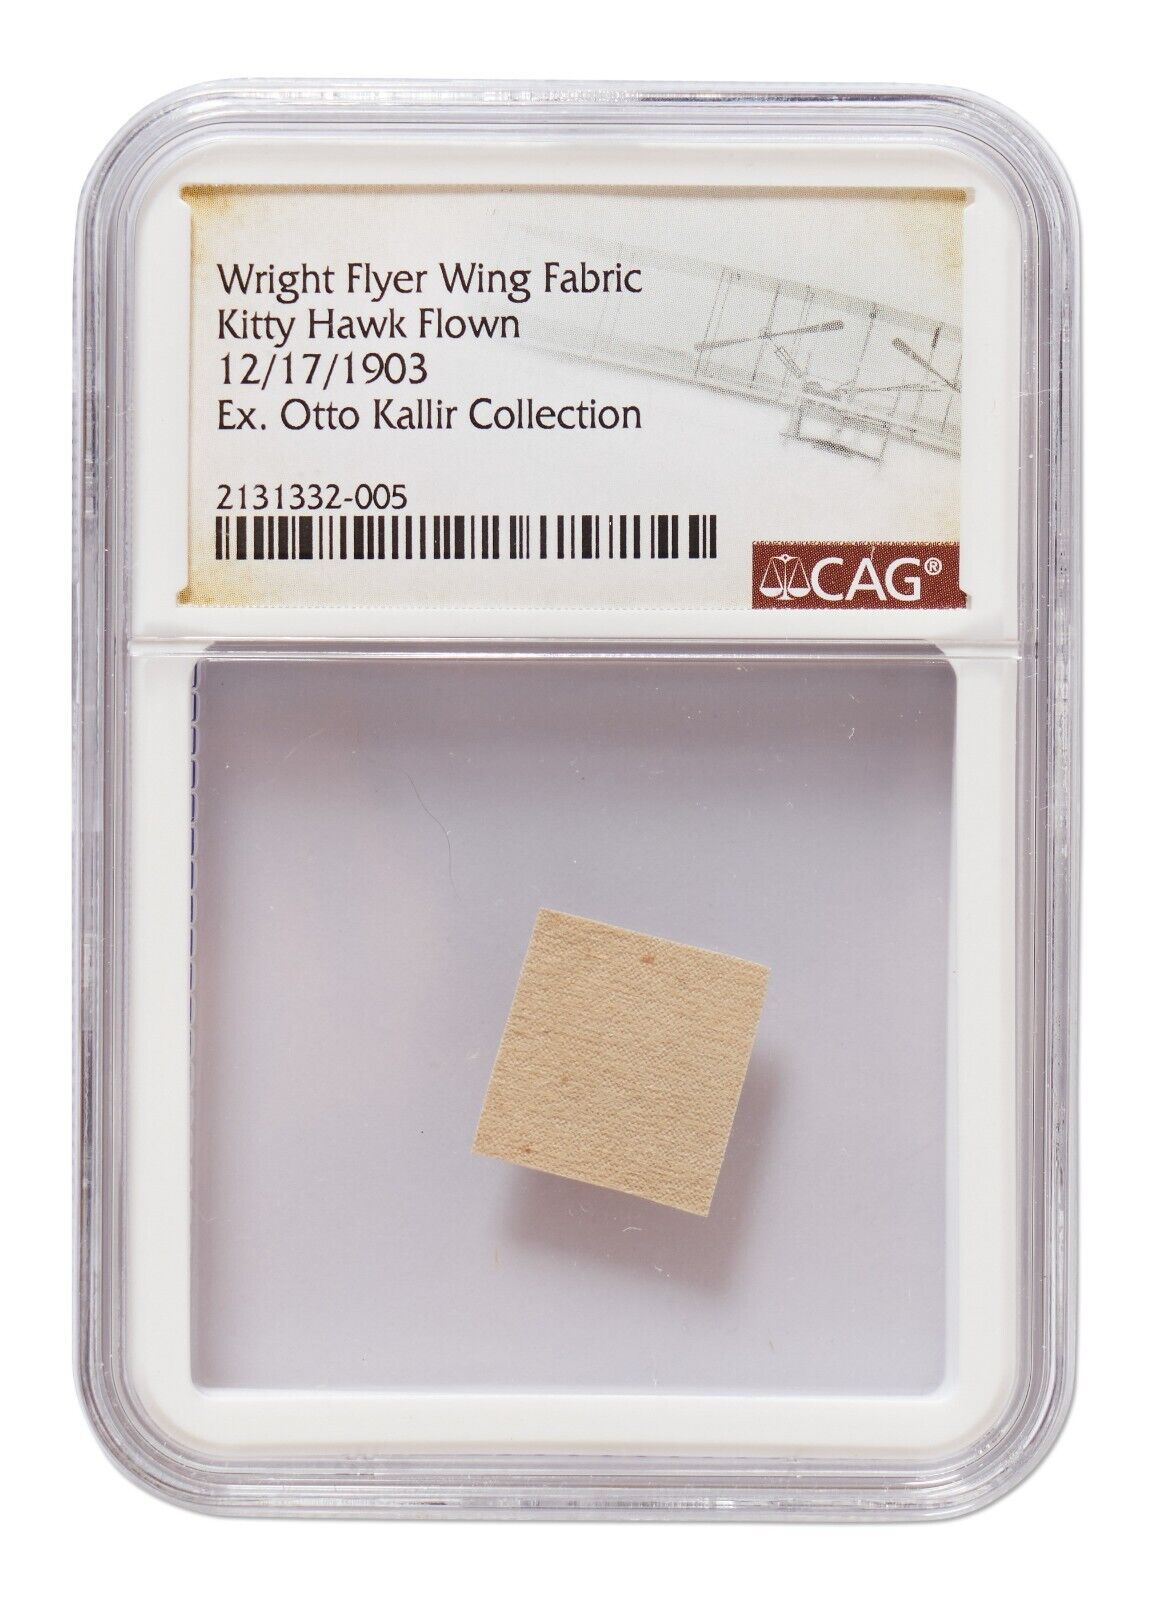 Wright Flyer Fabric Swatch Flown @ Kitty Hawk During 1st Flight CAG Encapsulated